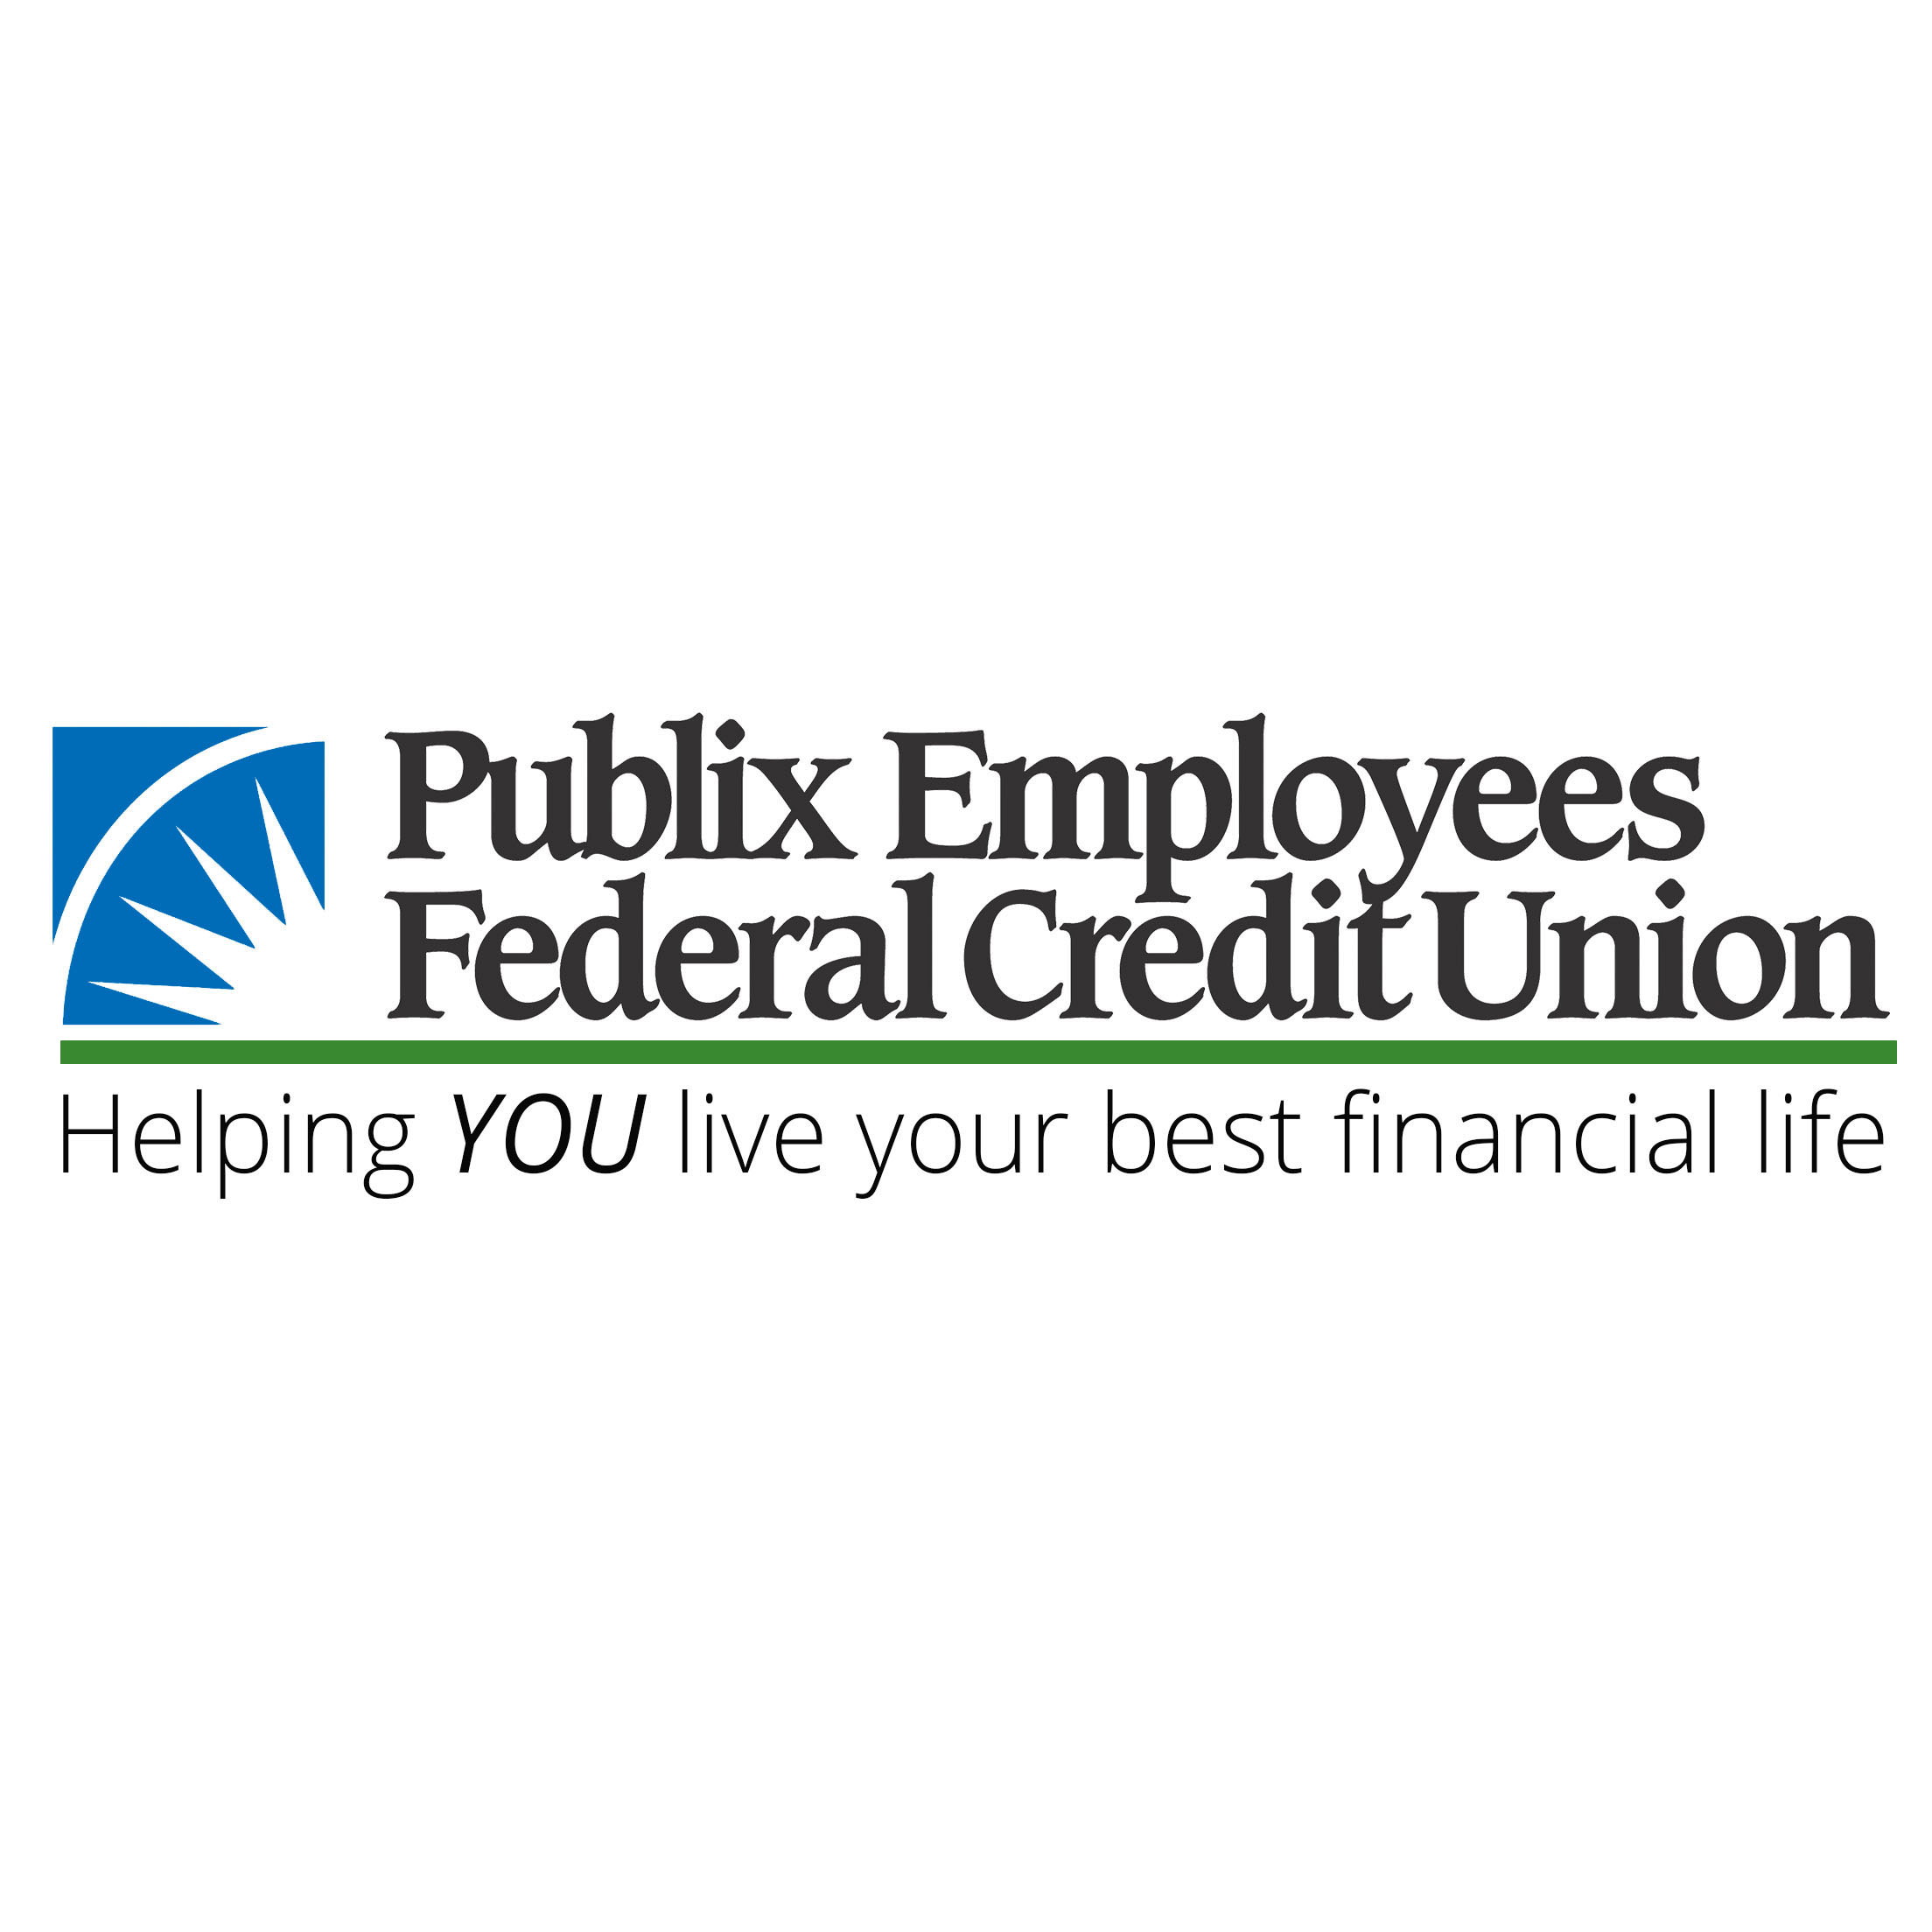 Publix Employees Federal Credit Union